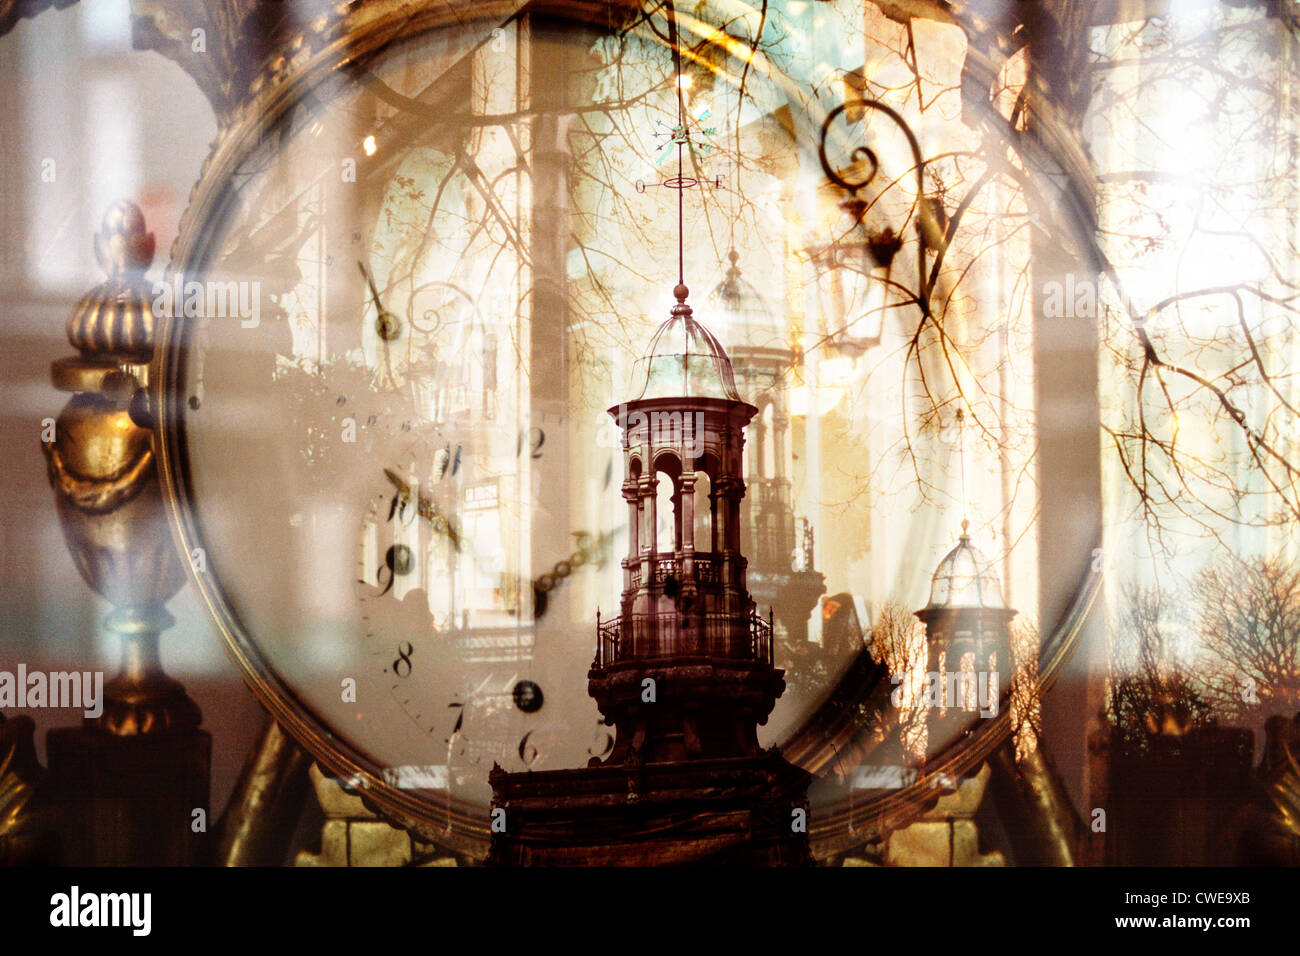 Digital Composite Image With Clock And Old Building Stock Photo